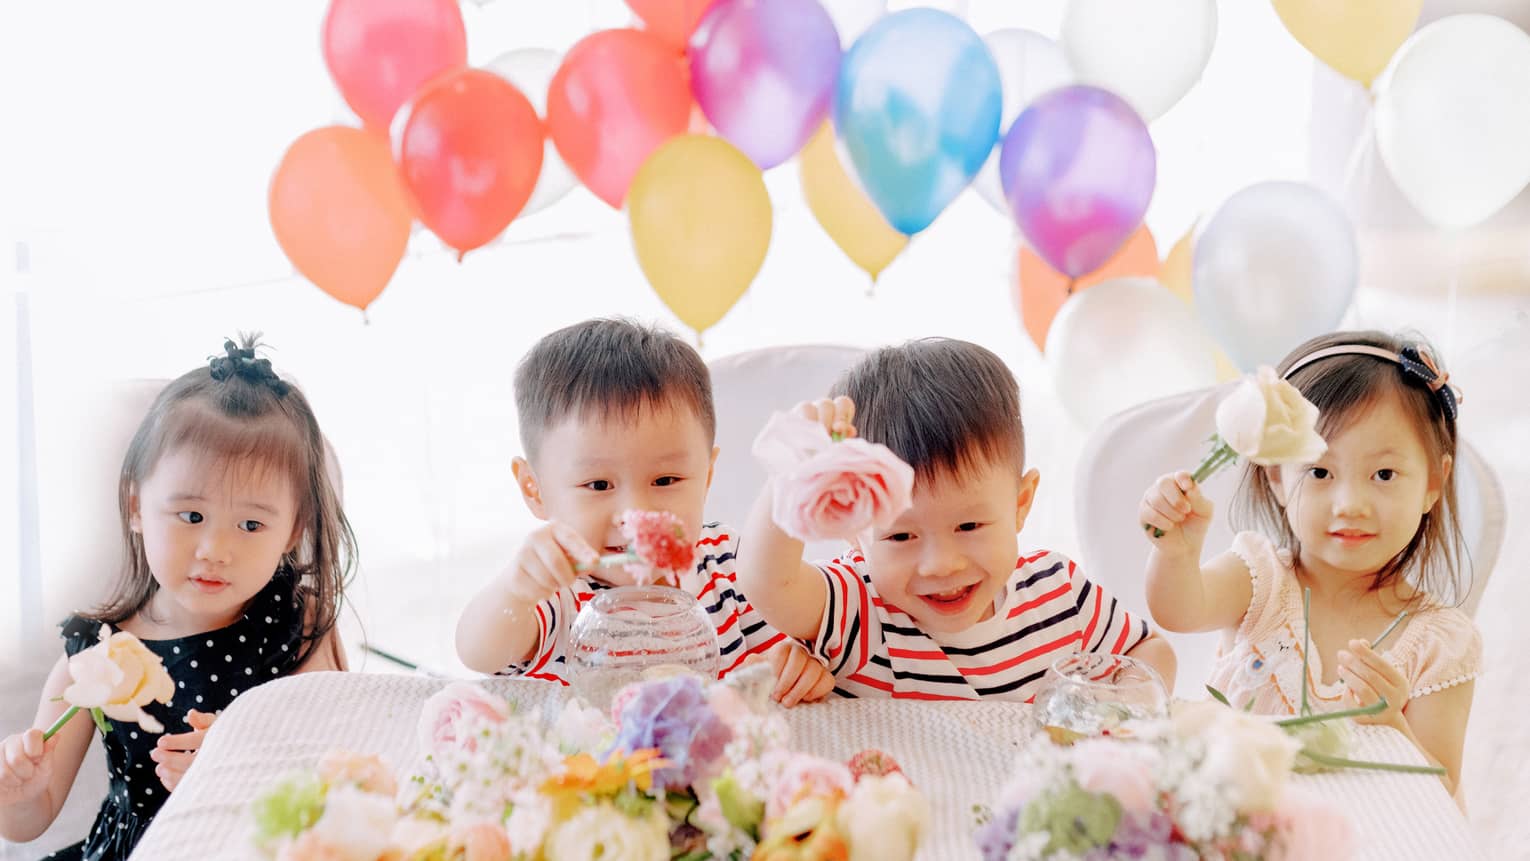 Four toddler children holding roses at table with balloons behind them